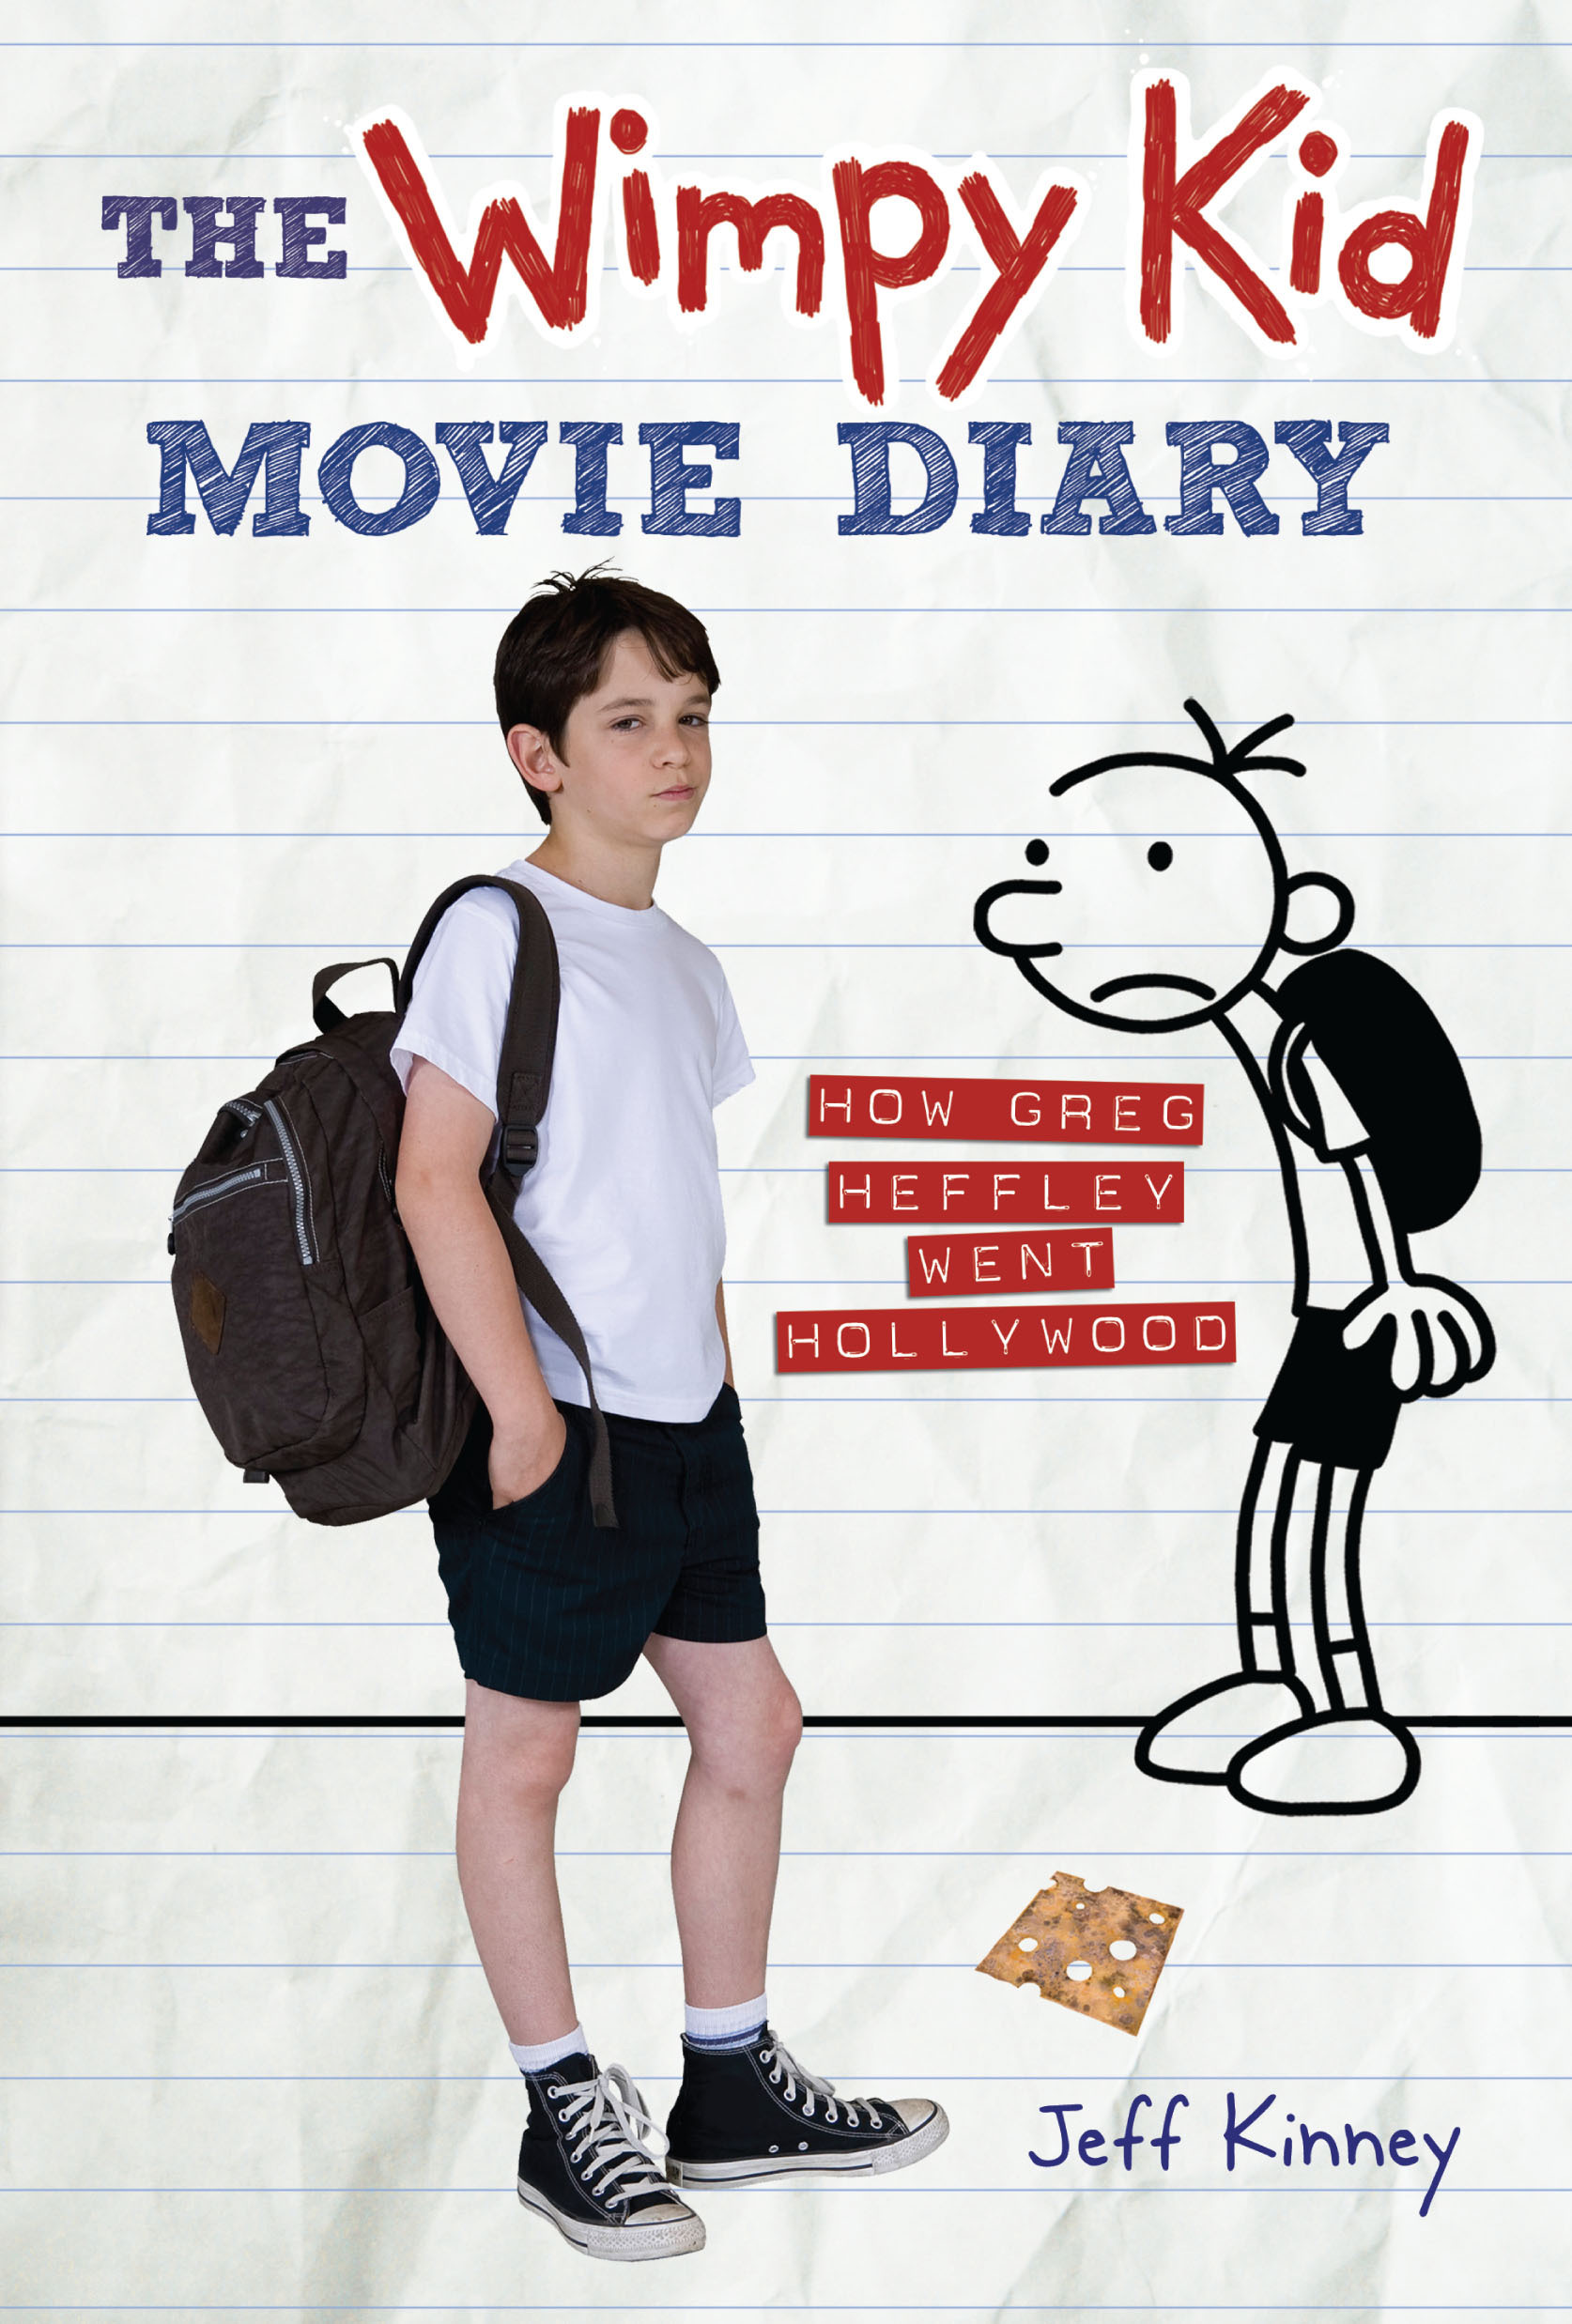 diary of a wimpy kid cabin fever read it online